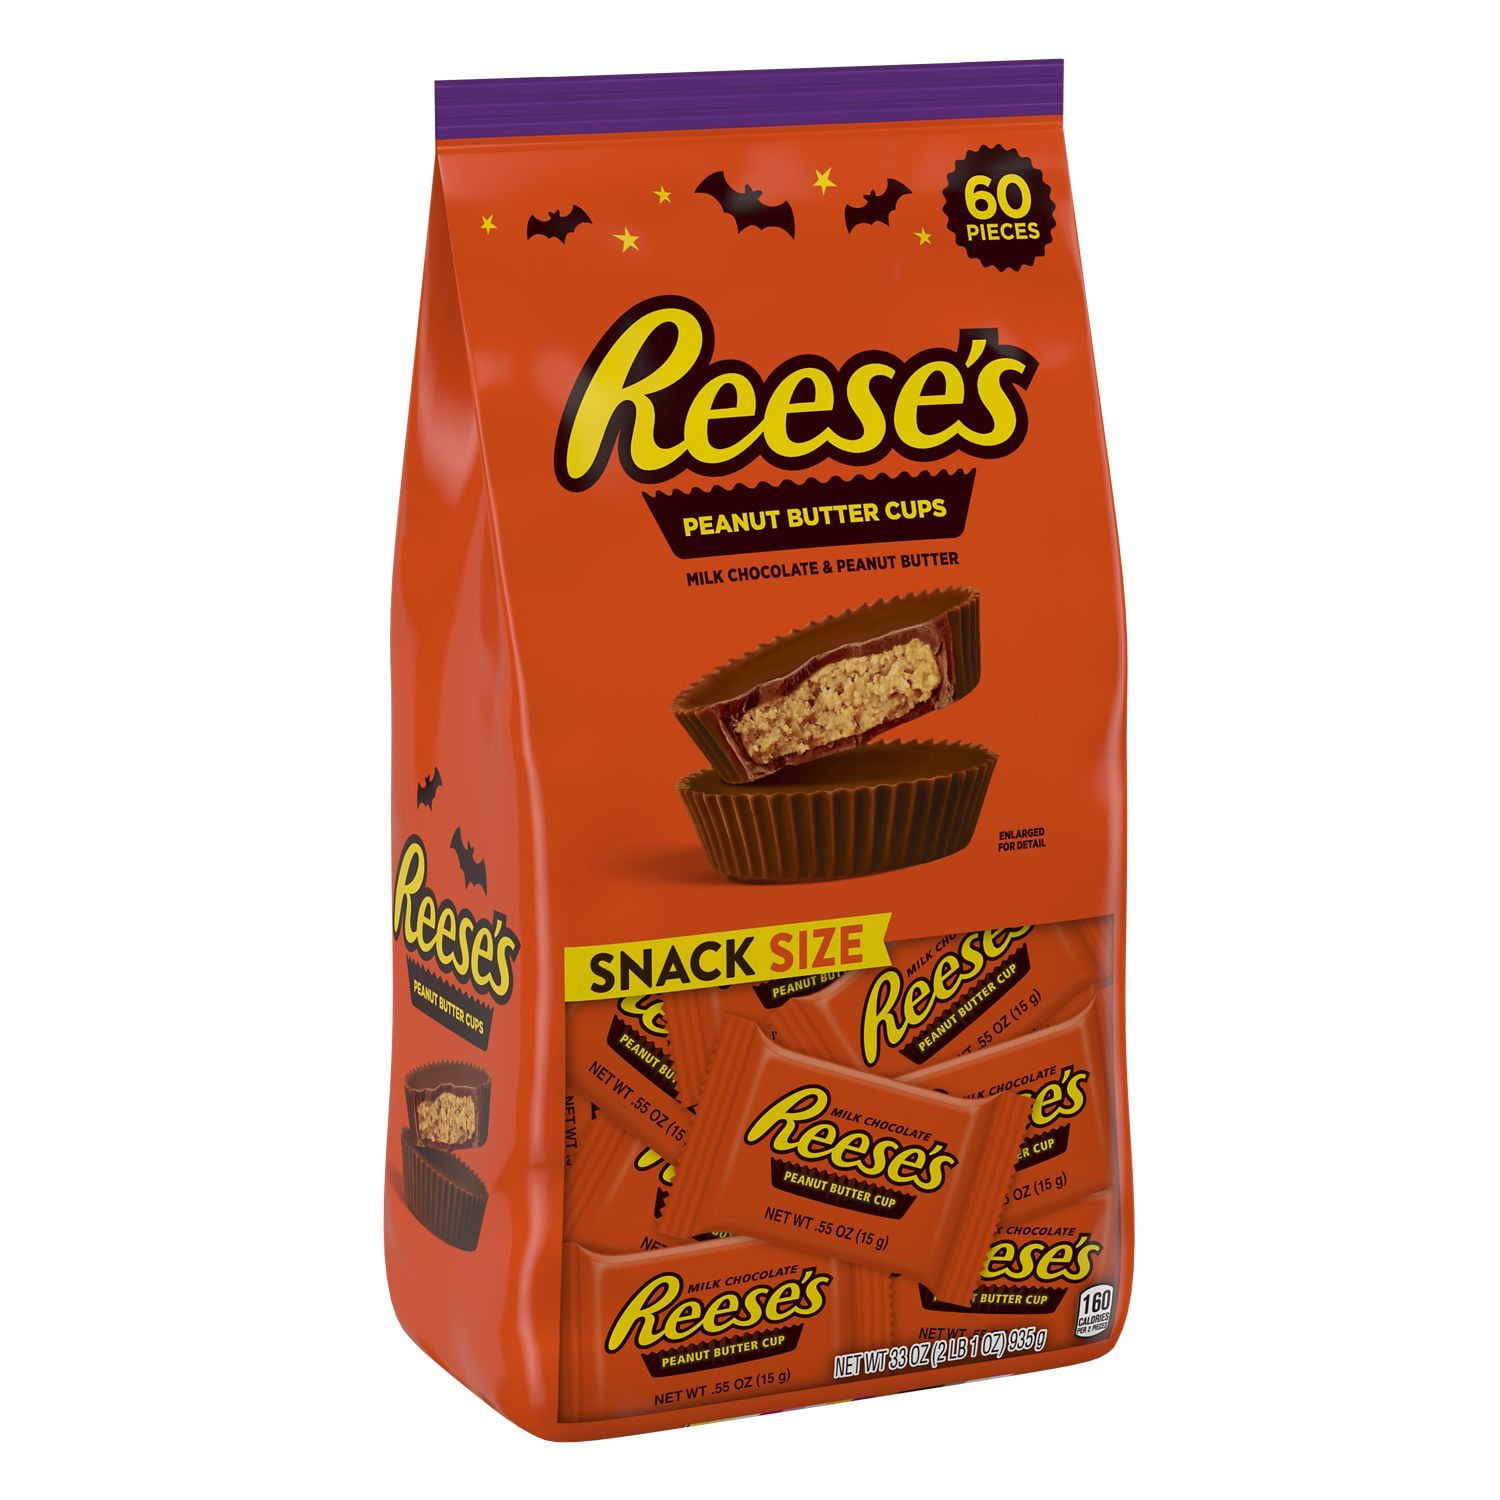 REESE'S, Halloween Candy, Snack Size Milk Chocolate Peanut Butter Cups, 33 oz, Bulk Bag (60 Pieces)